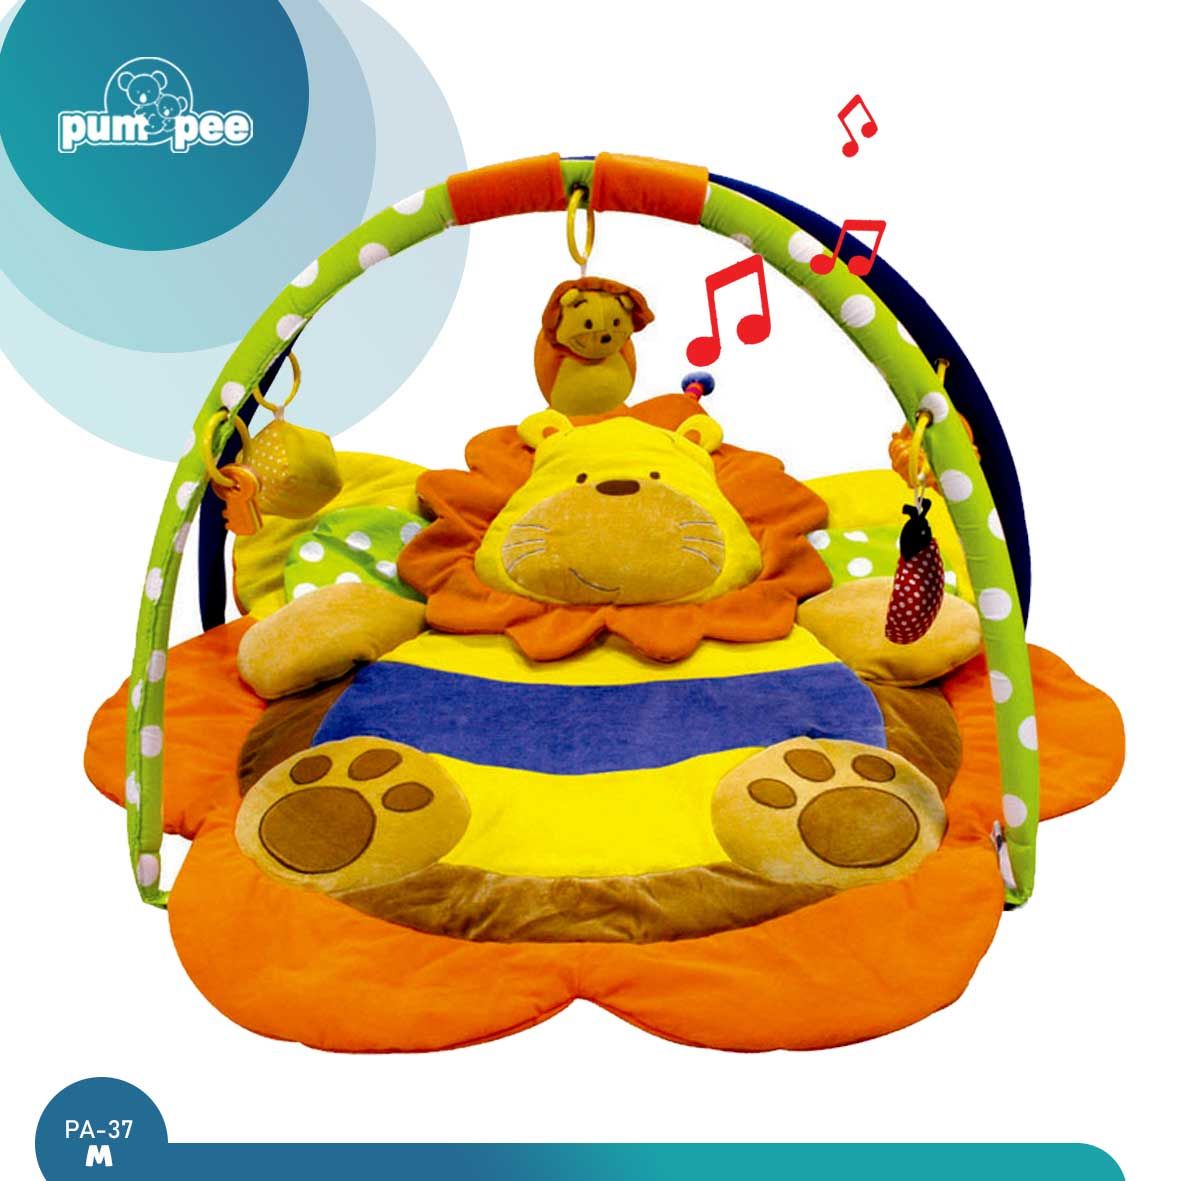 Pumpee Polyester Play mat with Music (Zoo Lion Bee) | PA-37M - 1